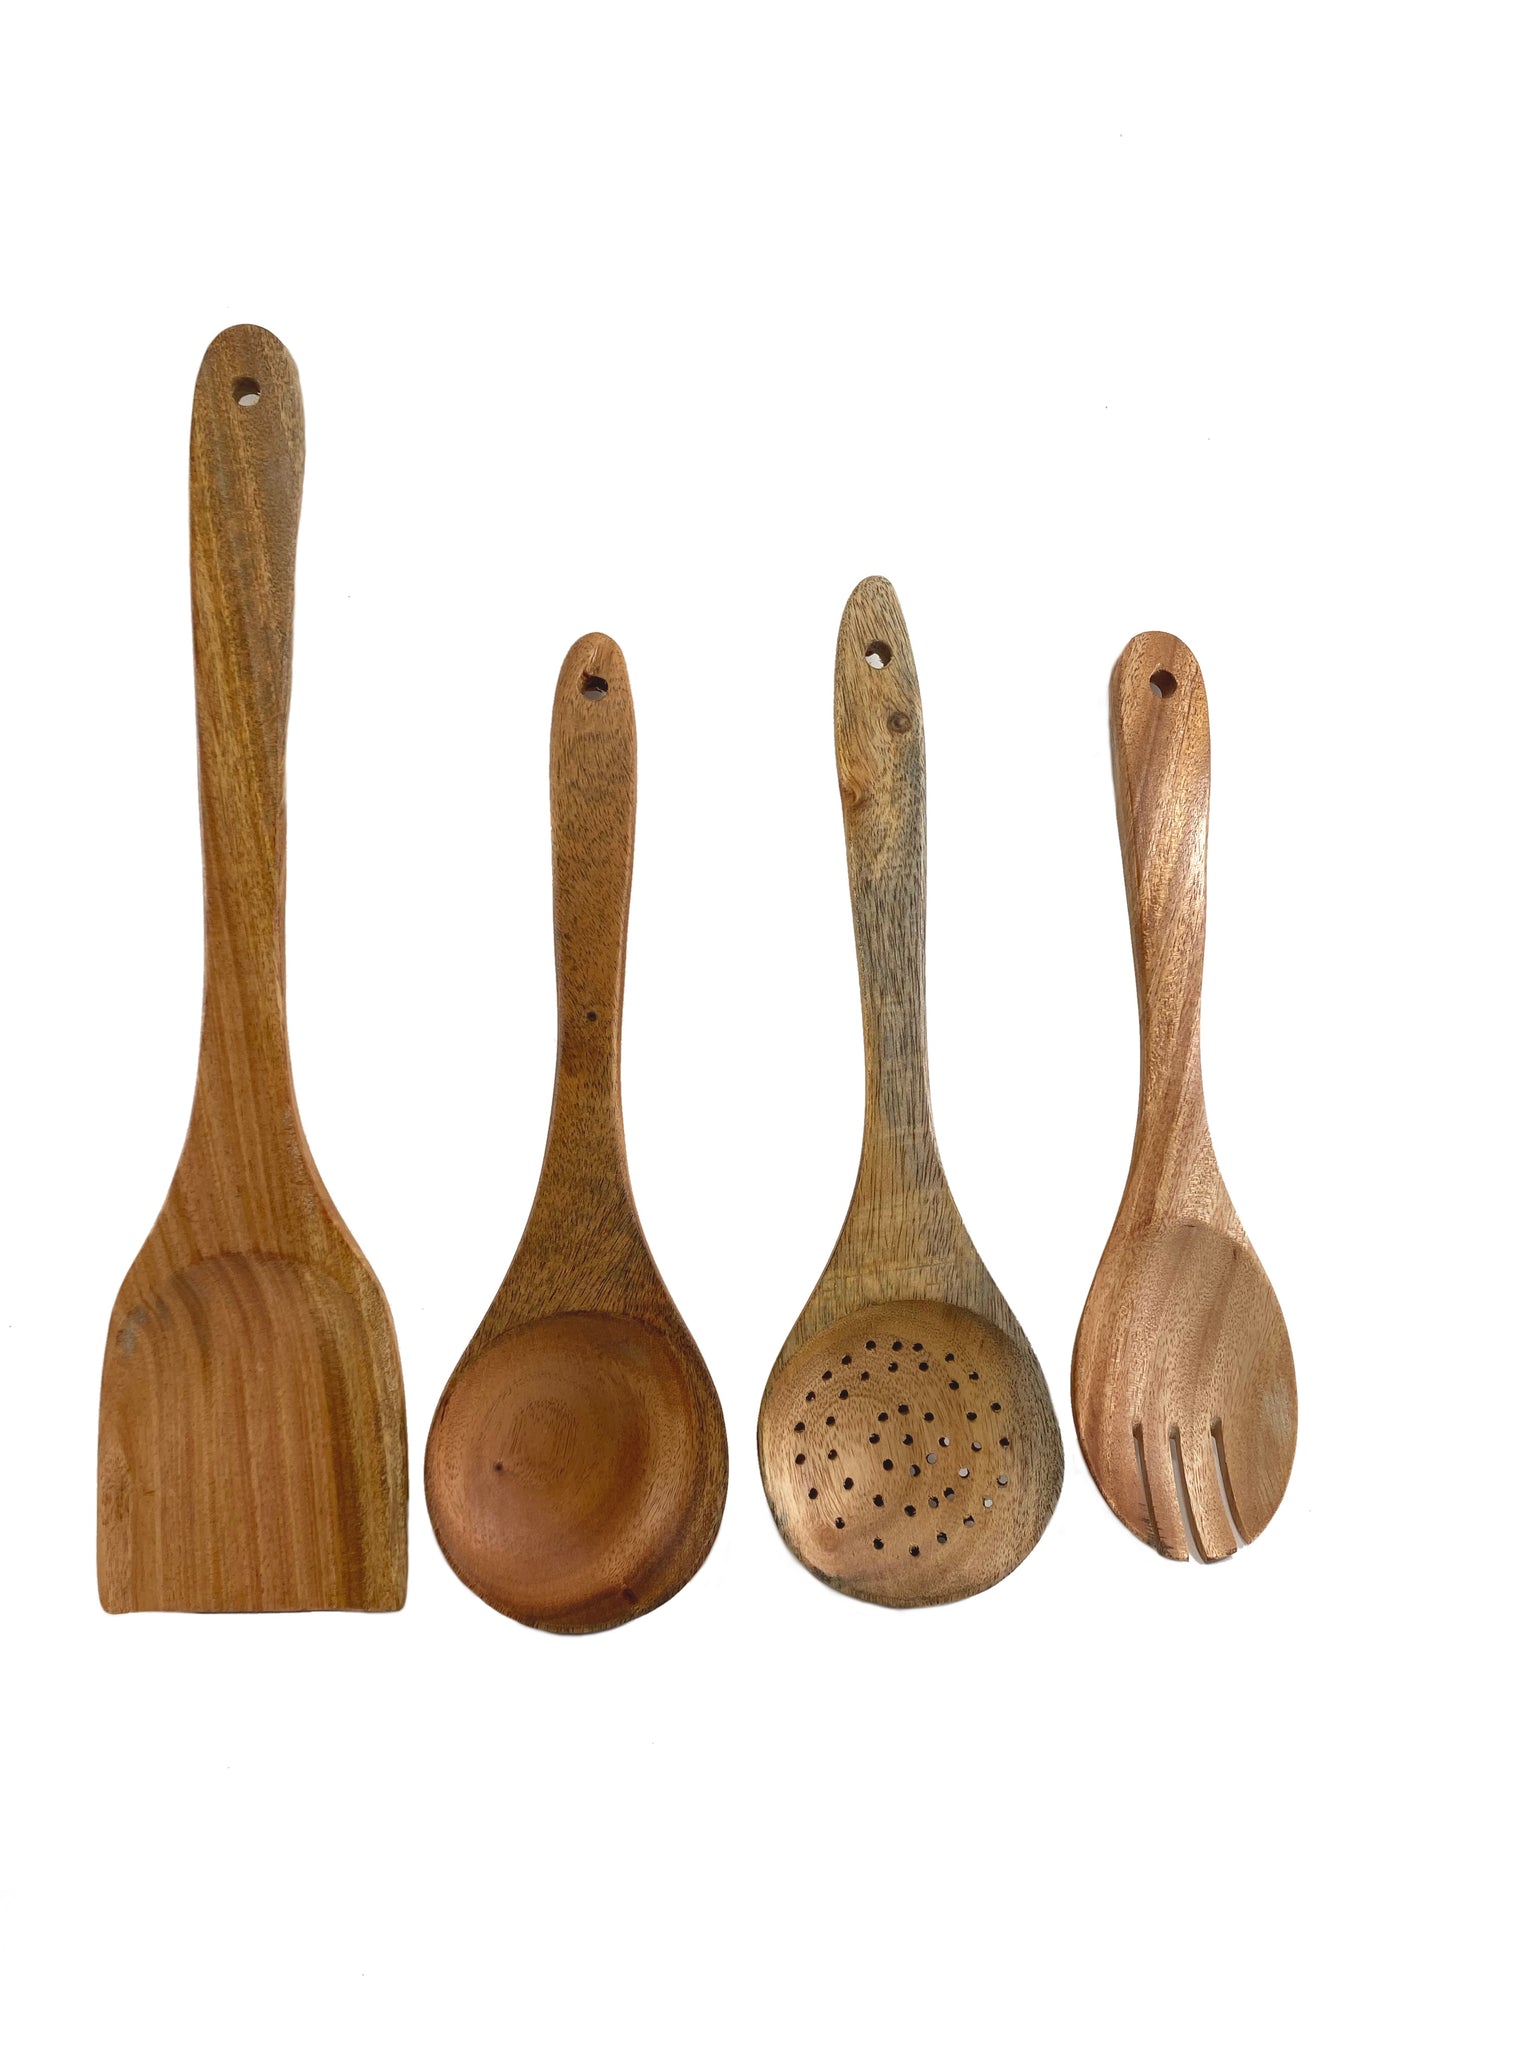 Wooden Spoons For Cooking, Wooden Cooking Utensils, Natural Wooden Spoons  For Non-stick Pan - Buy Wooden Spoons For Cooking, Wooden Cooking Utensils,  Natural Wooden Spoons For Non-stick Pan Product on